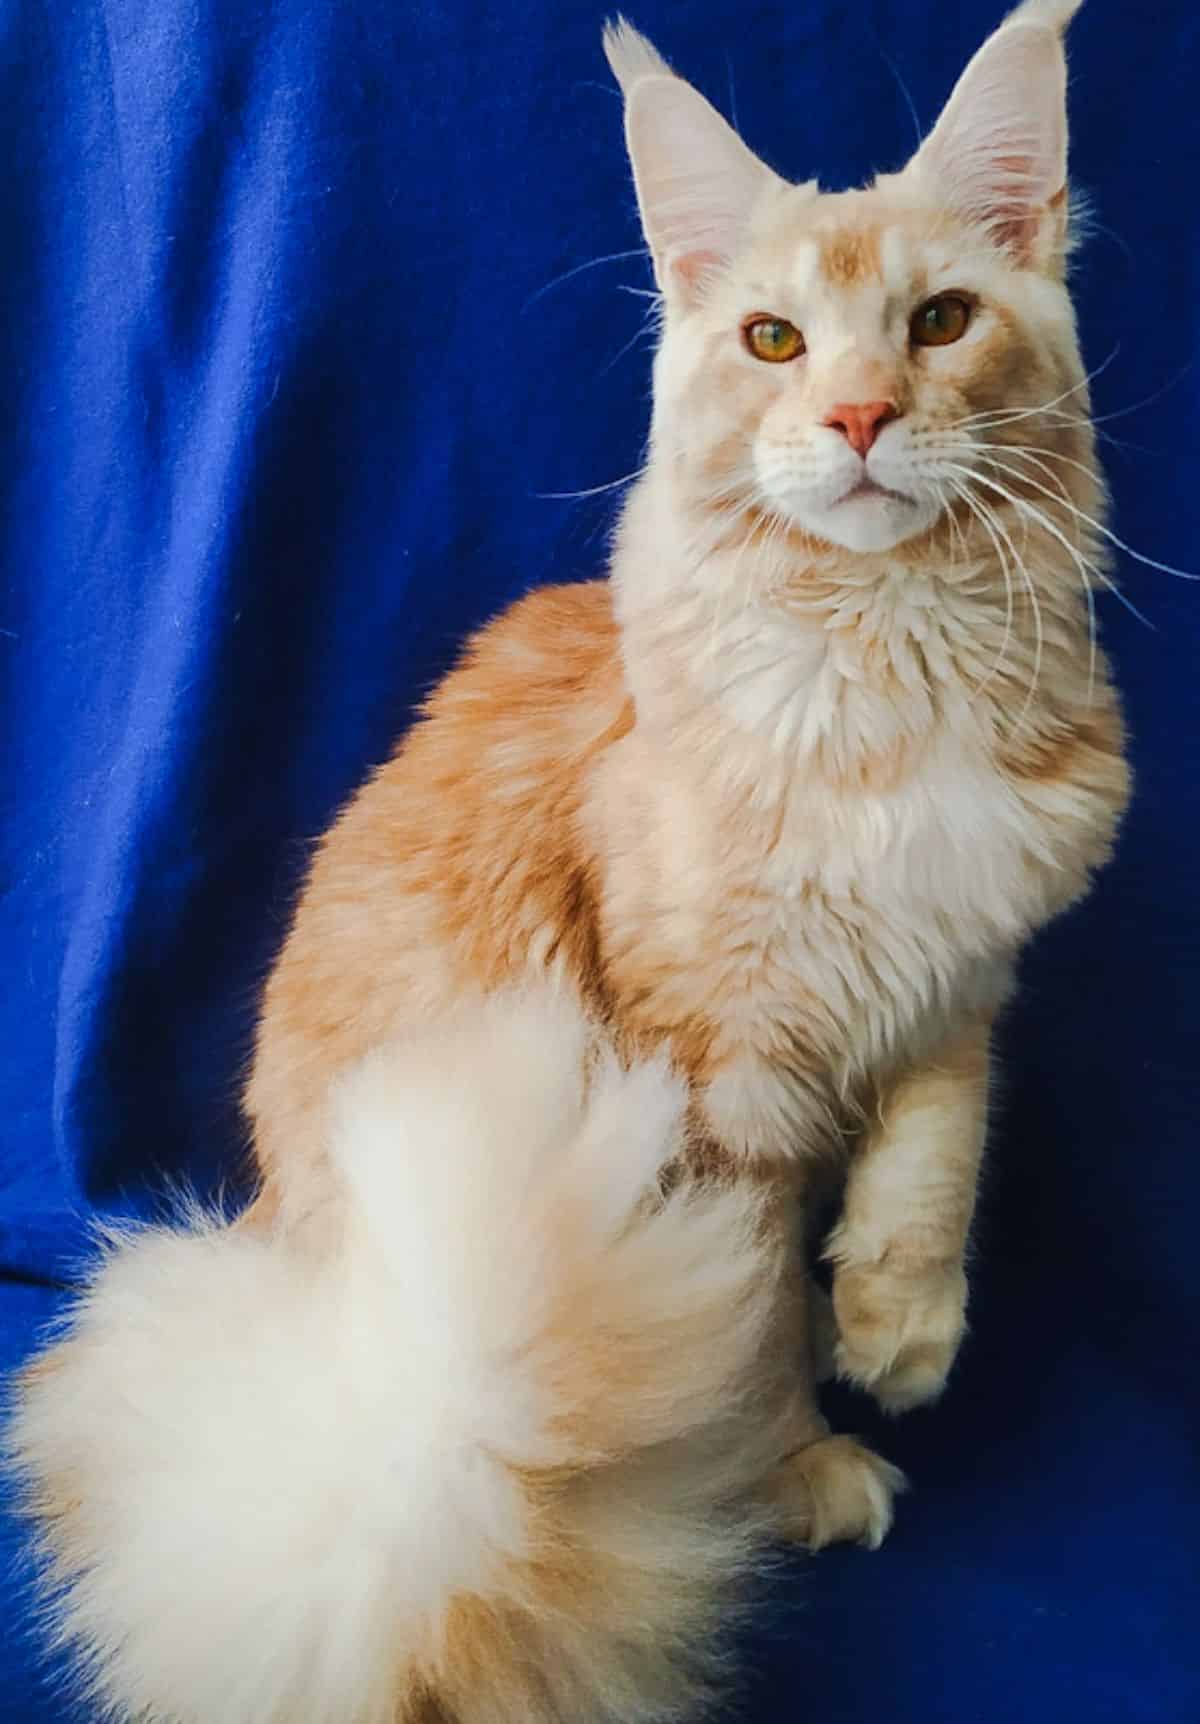 A cream tall maine coon sitting on a blue blanket.